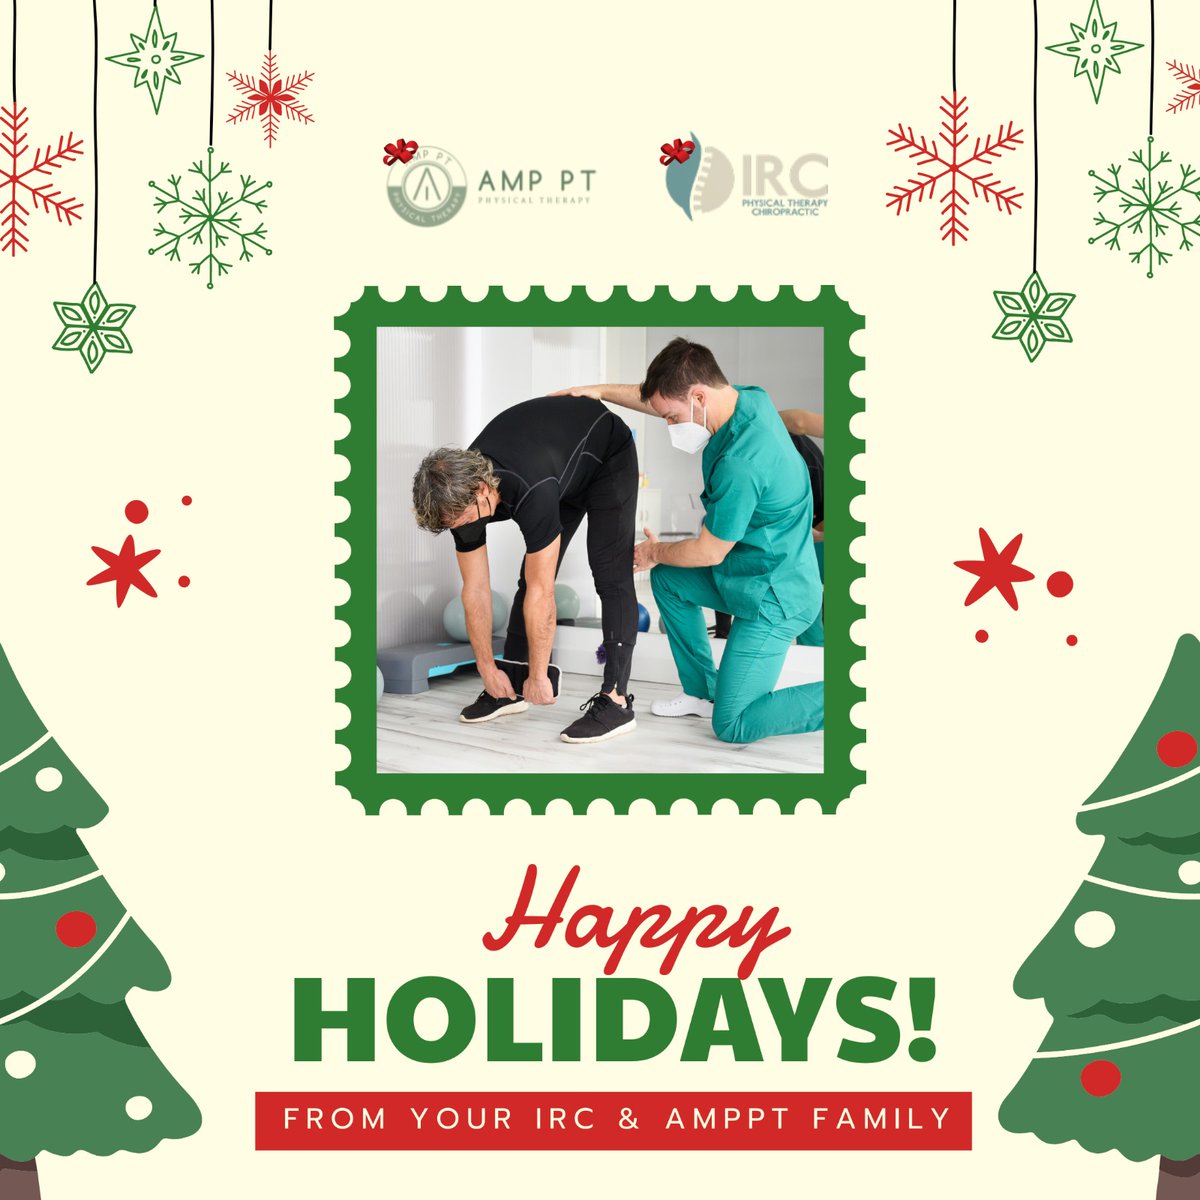 🦌🎄 We wish you a MERRY rehab! 🎶🎵 May your days be pain-free, your spirits high👼🌟, and your heart be full. Have a happy holiday season, from our IRC and AMP PT clinics to your home!🎁☃️❄️ #holidayseason #christmas #physicaltherapydallas #chiropractichealth #painrelief